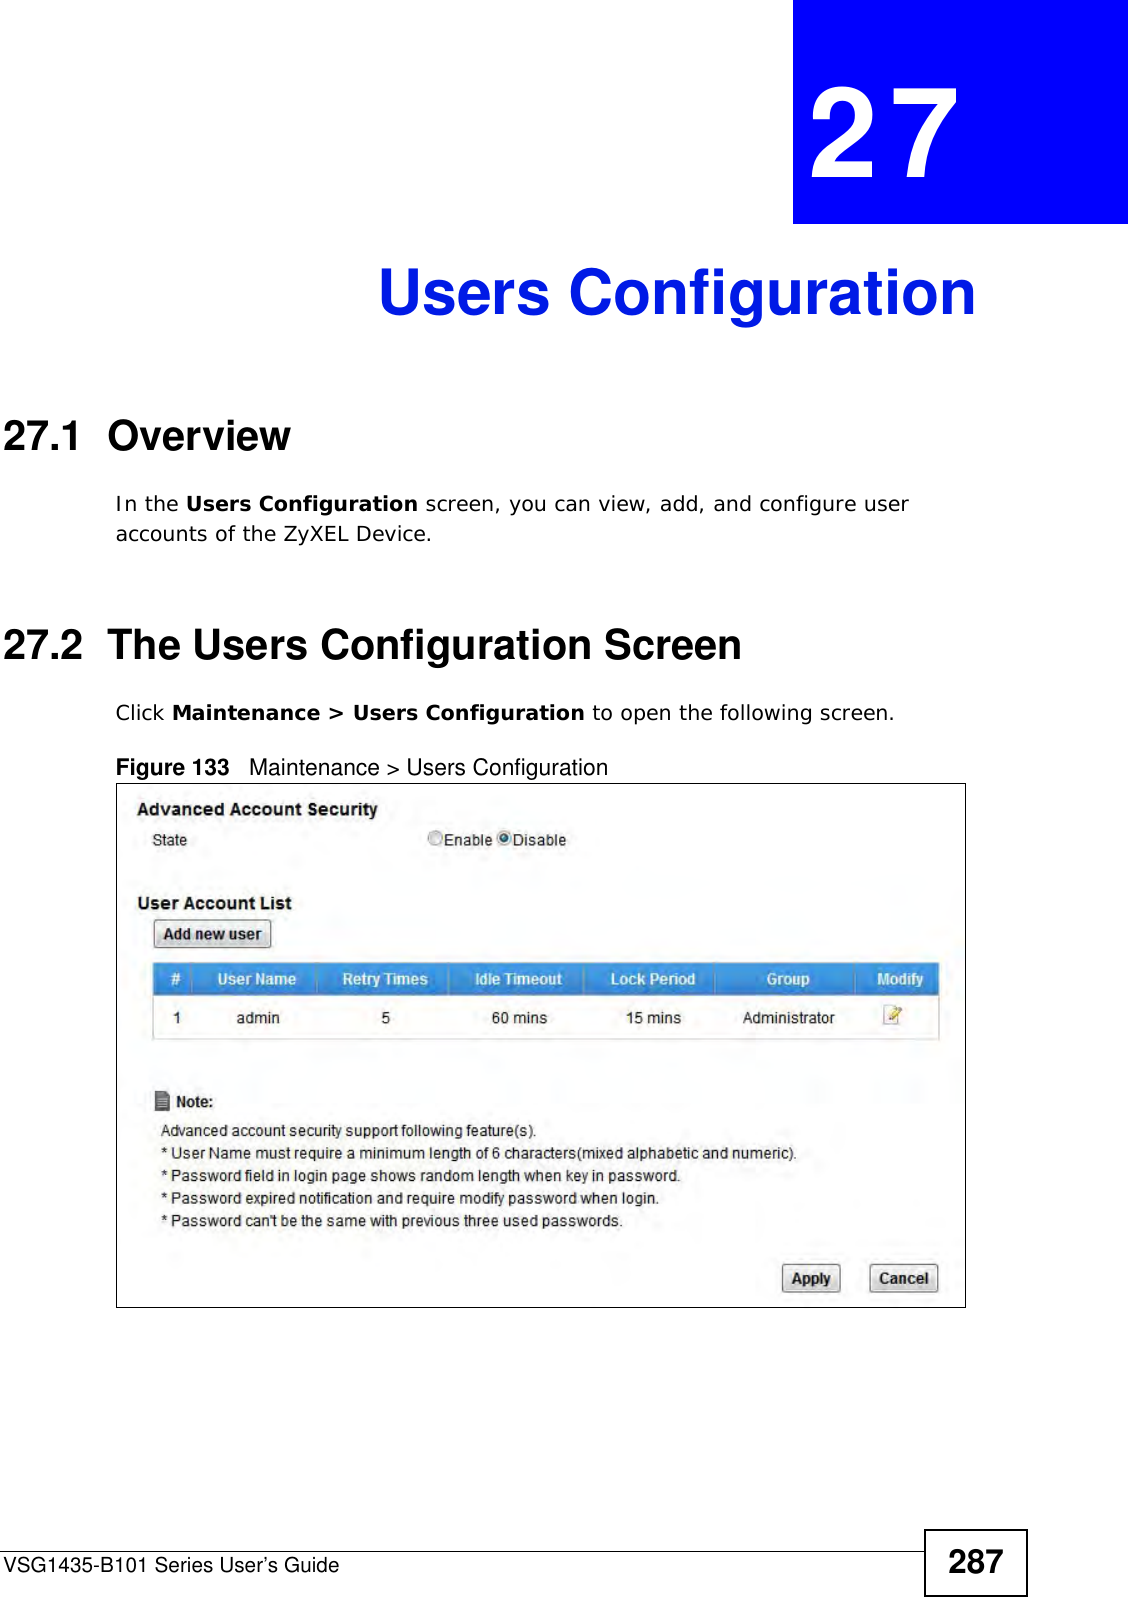 VSG1435-B101 Series User’s Guide 287CHAPTER  27 Users Configuration27.1  Overview In the Users Configuration screen, you can view, add, and configure user accounts of the ZyXEL Device.  27.2  The Users Configuration ScreenClick Maintenance &gt; Users Configuration to open the following screen.Figure 133   Maintenance &gt; Users Configuration